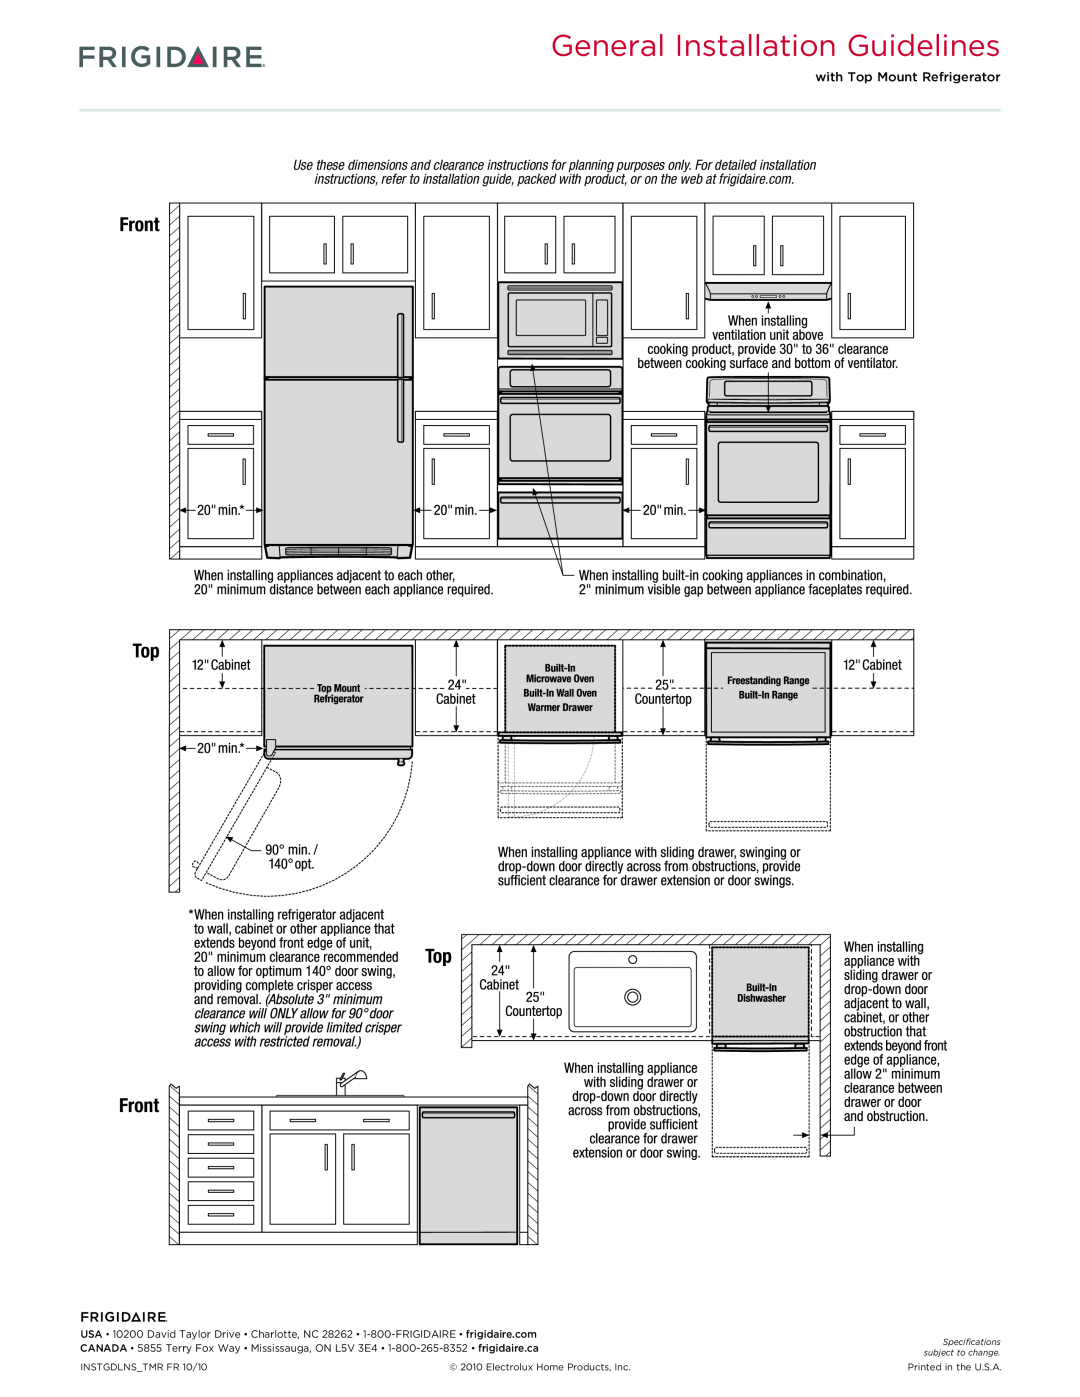 Frigidaire FFGS3025L S/W/B dimensions General Installation Guidelines, Top Front, with Top Mount Refrigerator 